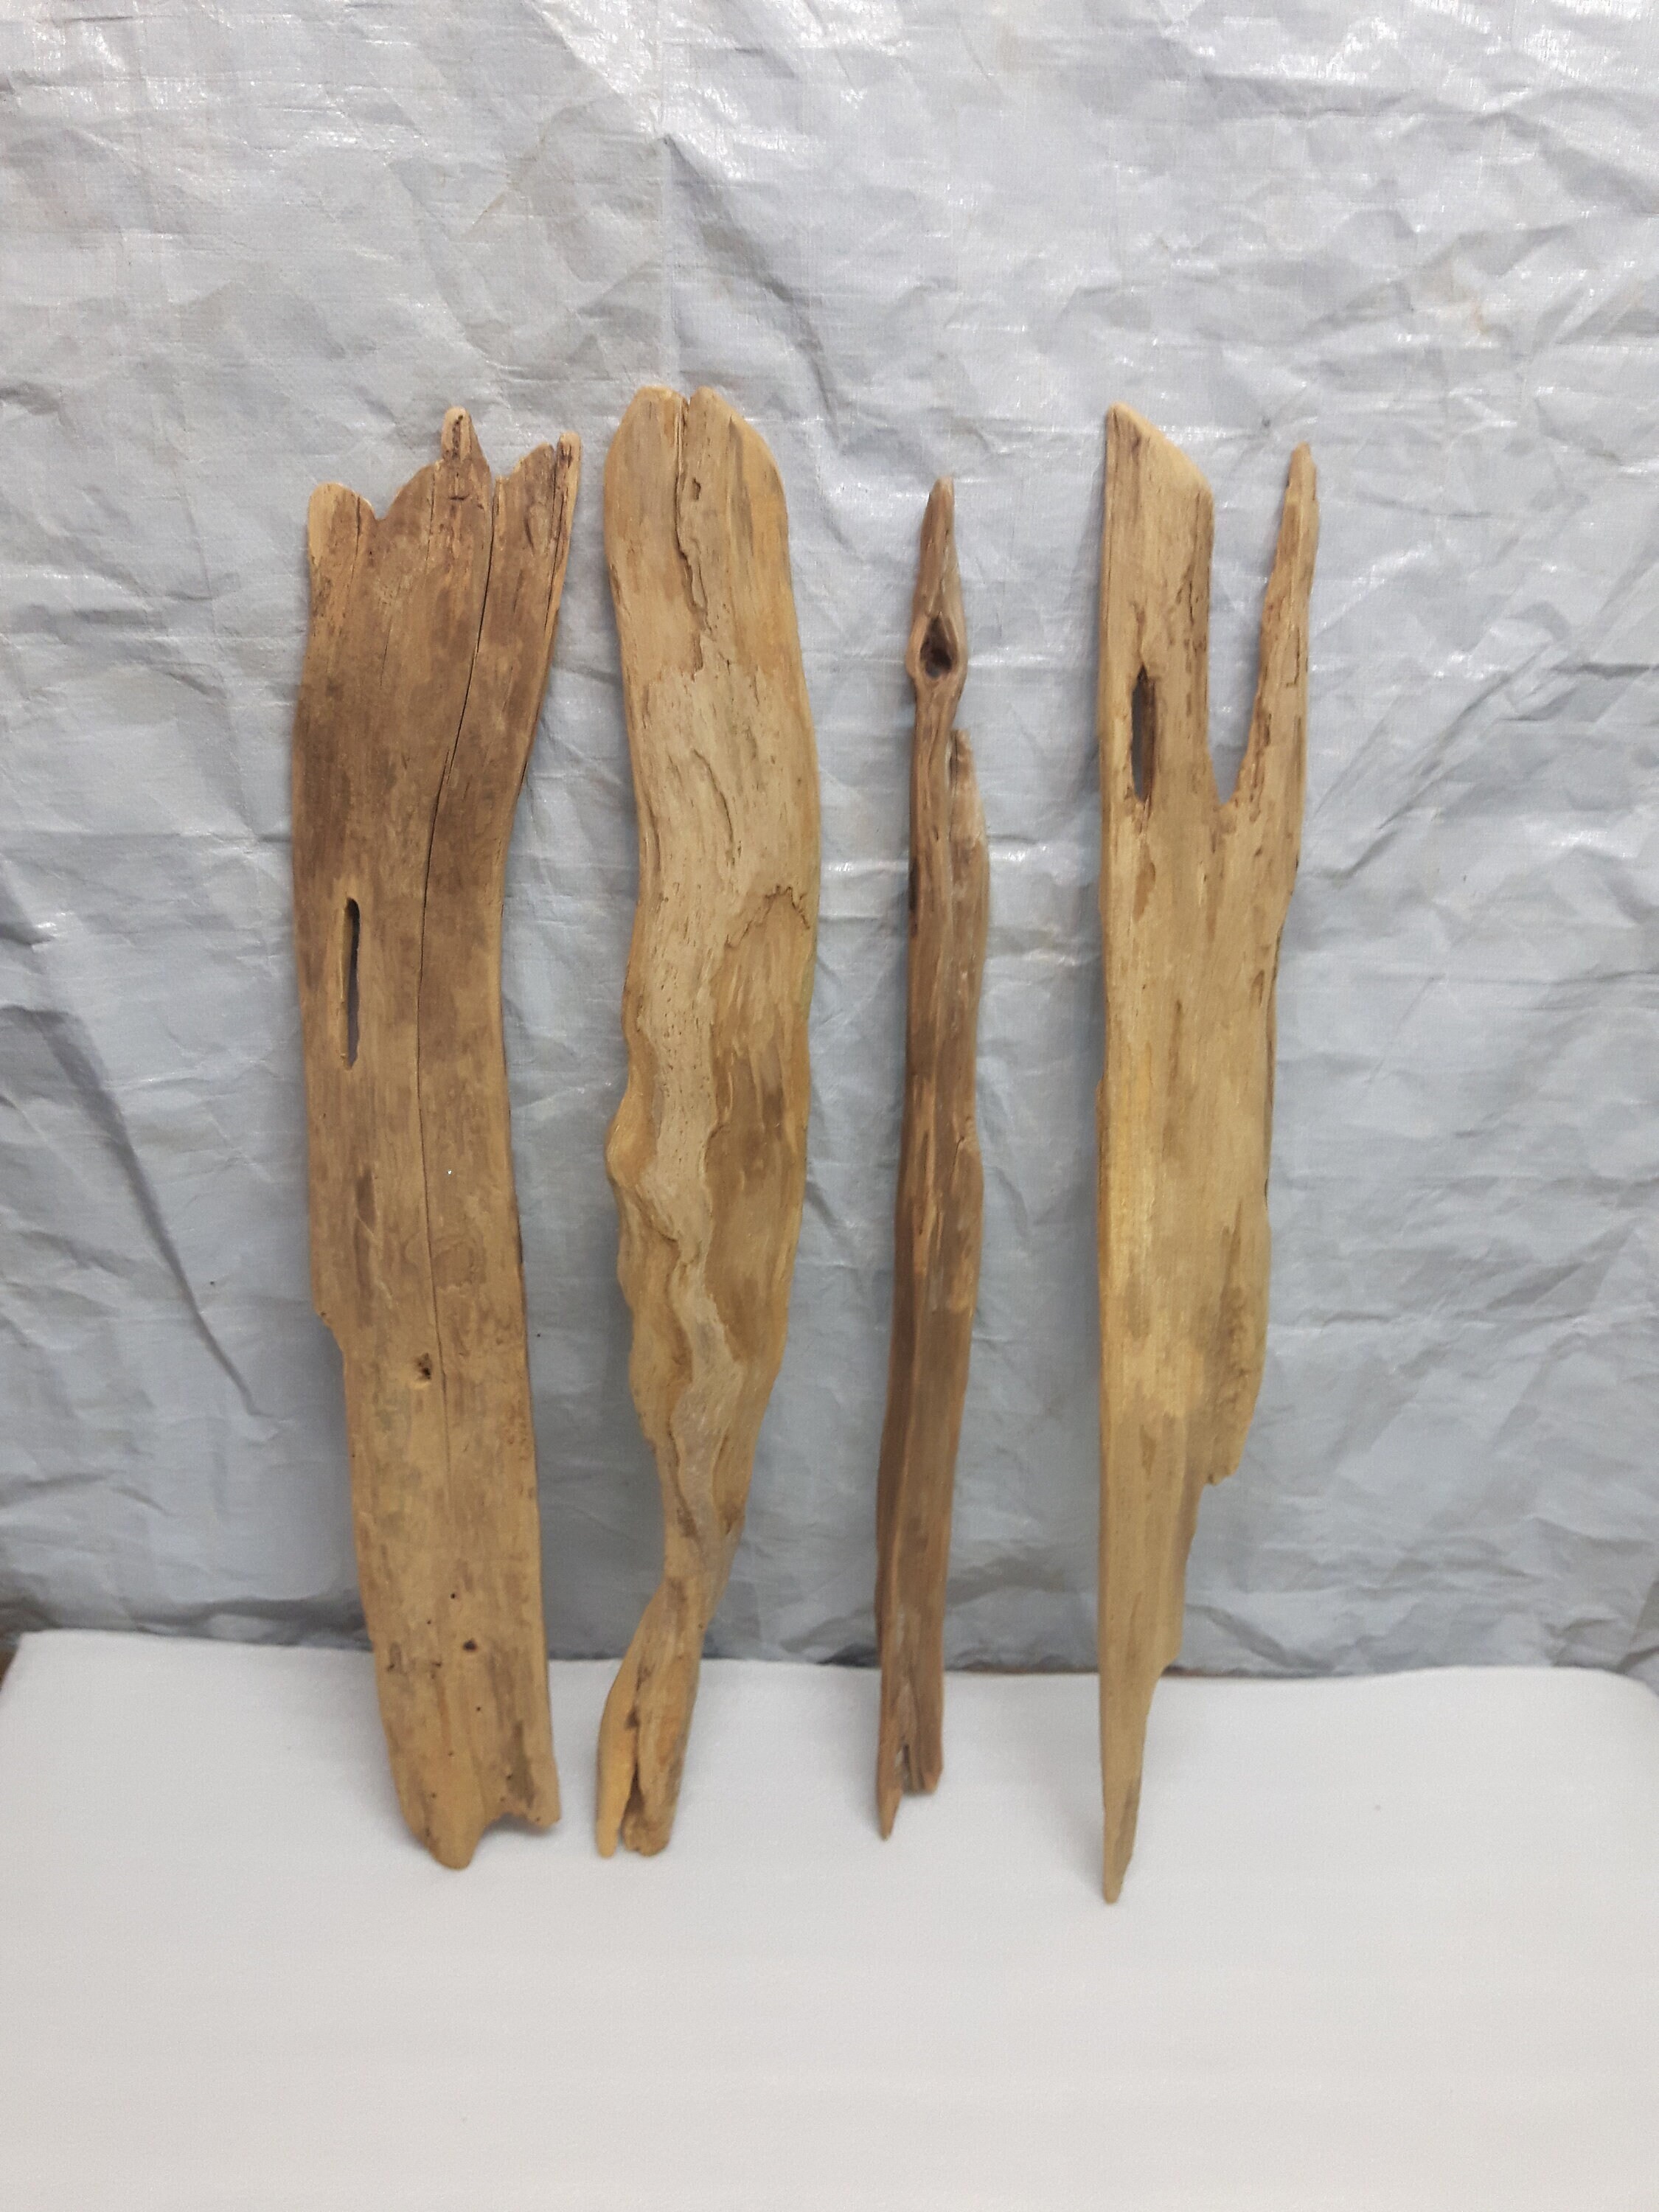 Natural Forest Wood Craft Sticks The Amazing Spider Driftwood Rustic Branches Terrarium Aquarium Ornaments Unfinished Raw Roots Piece